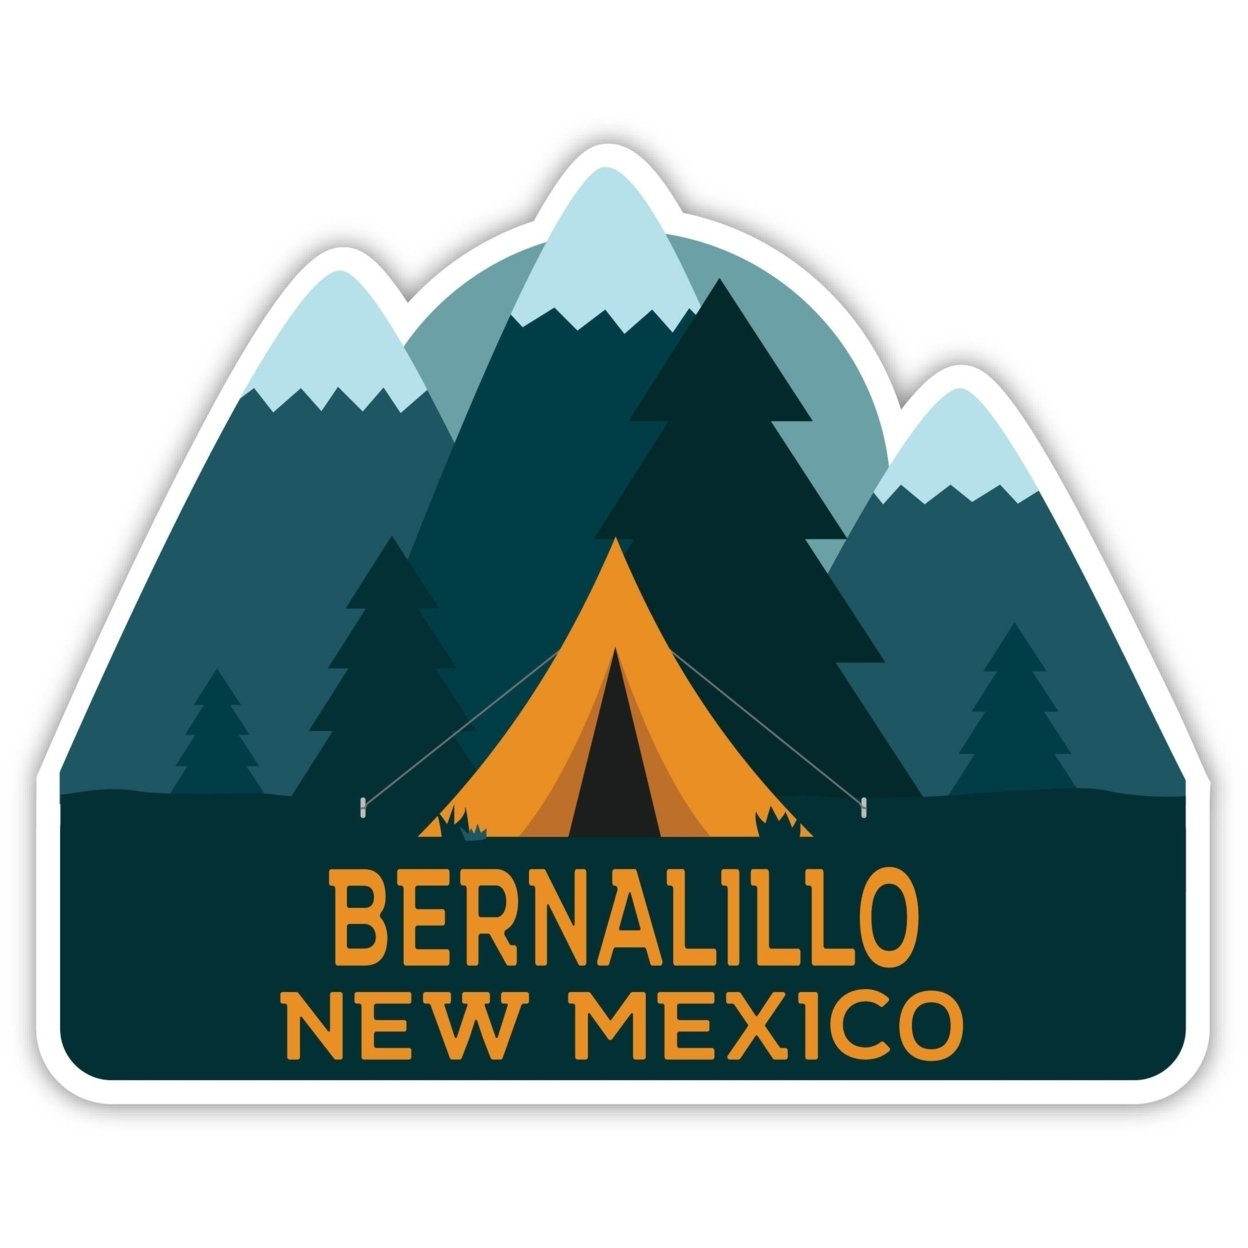 Bernalillo New Mexico Souvenir Decorative Stickers (Choose Theme And Size) - 4-Pack, 12-Inch, Tent